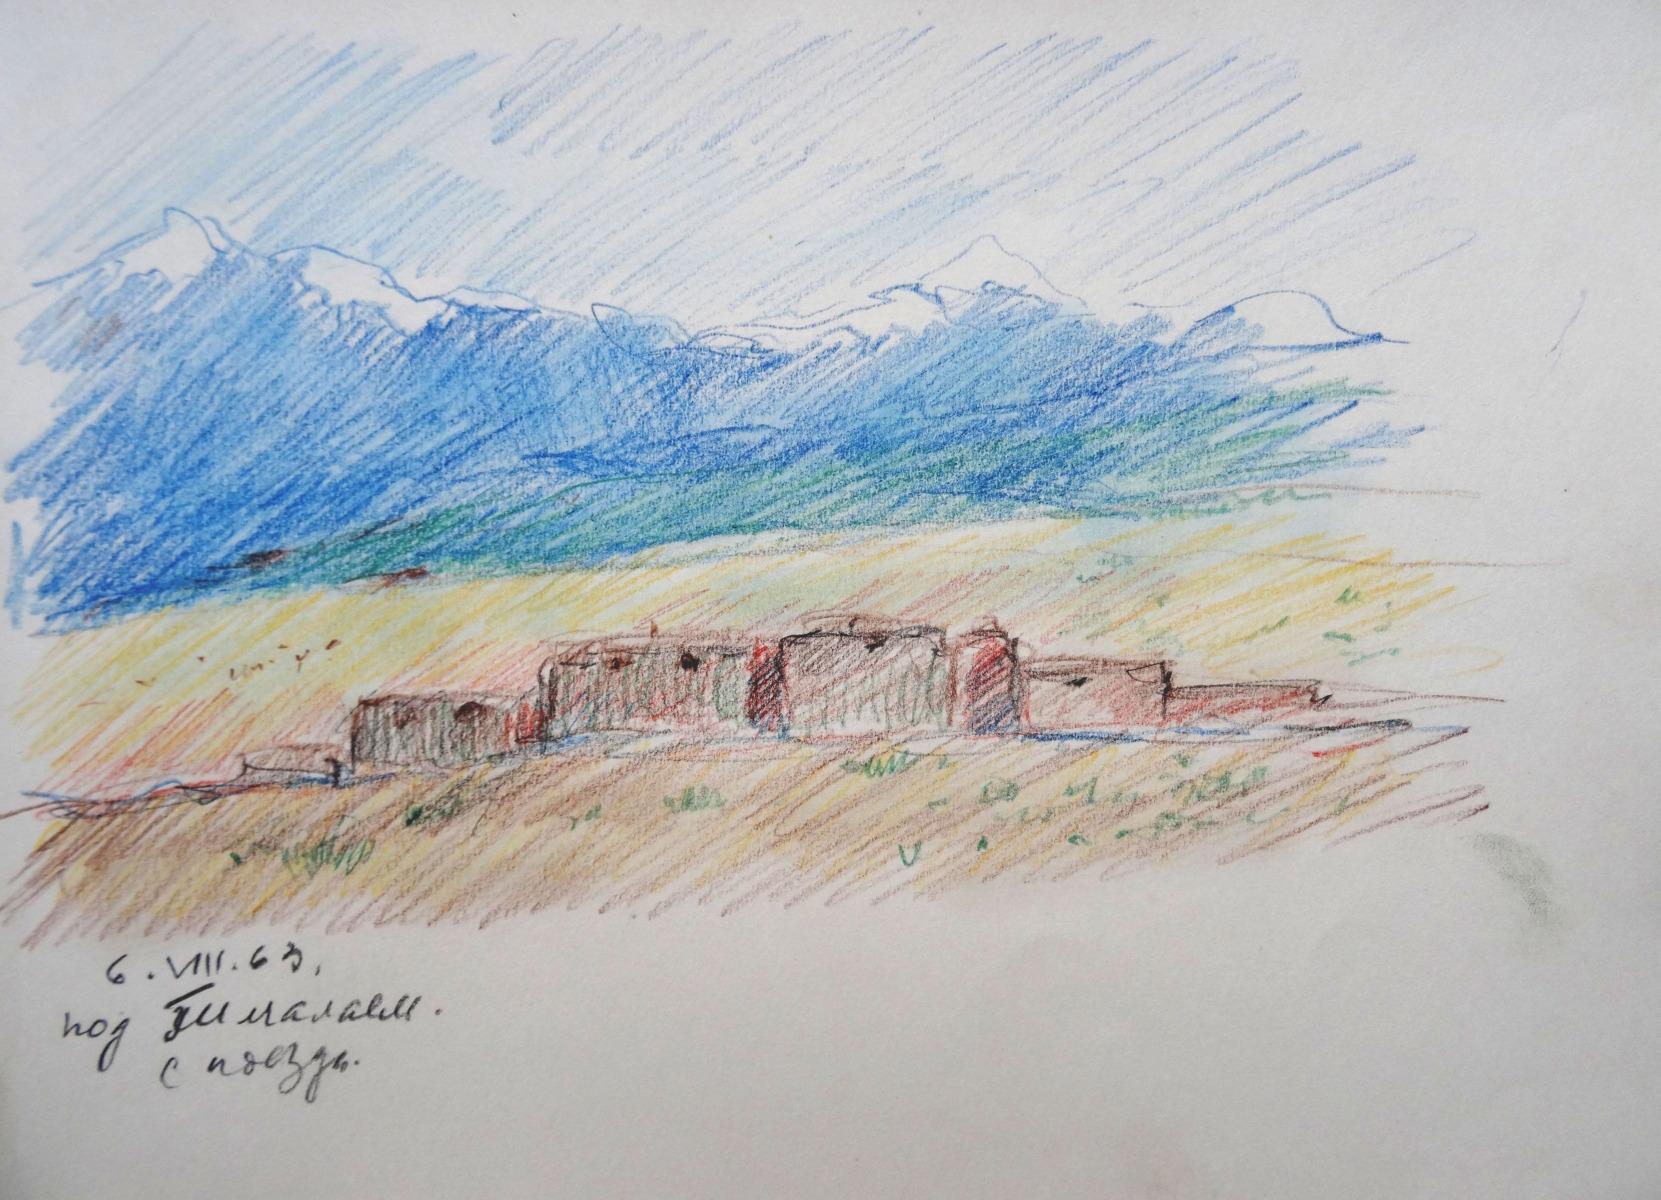 From the train to the Himalayas  1963., p/crayons, pencil, 20x27 cm